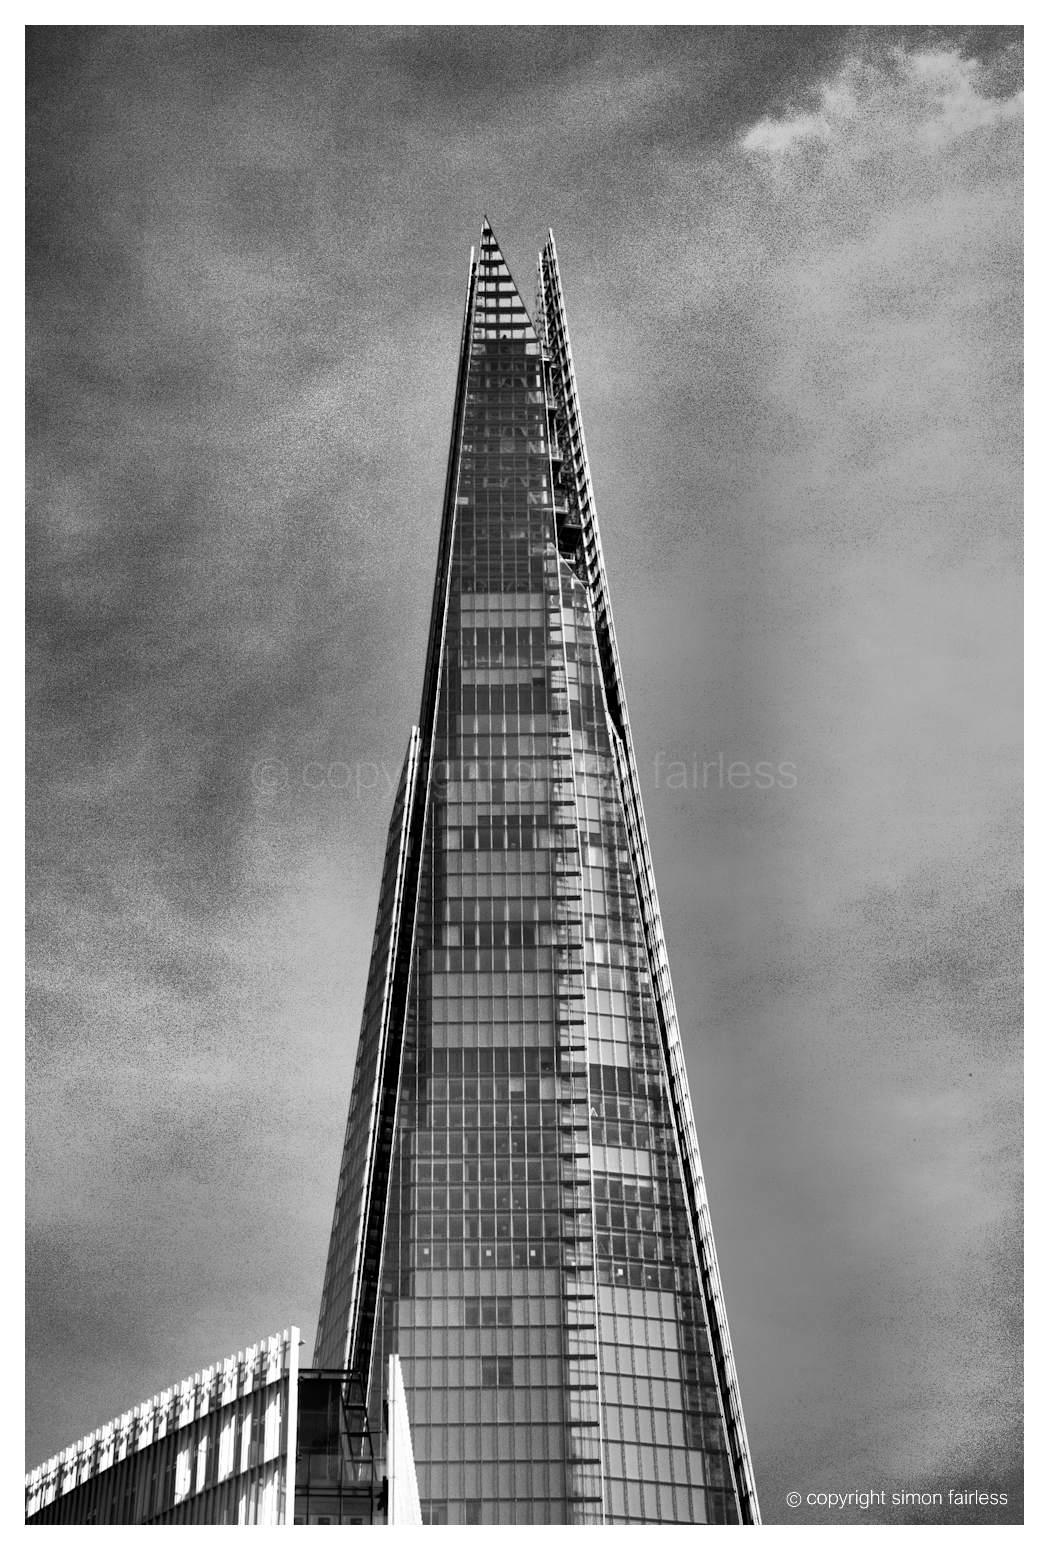 The Shard London images